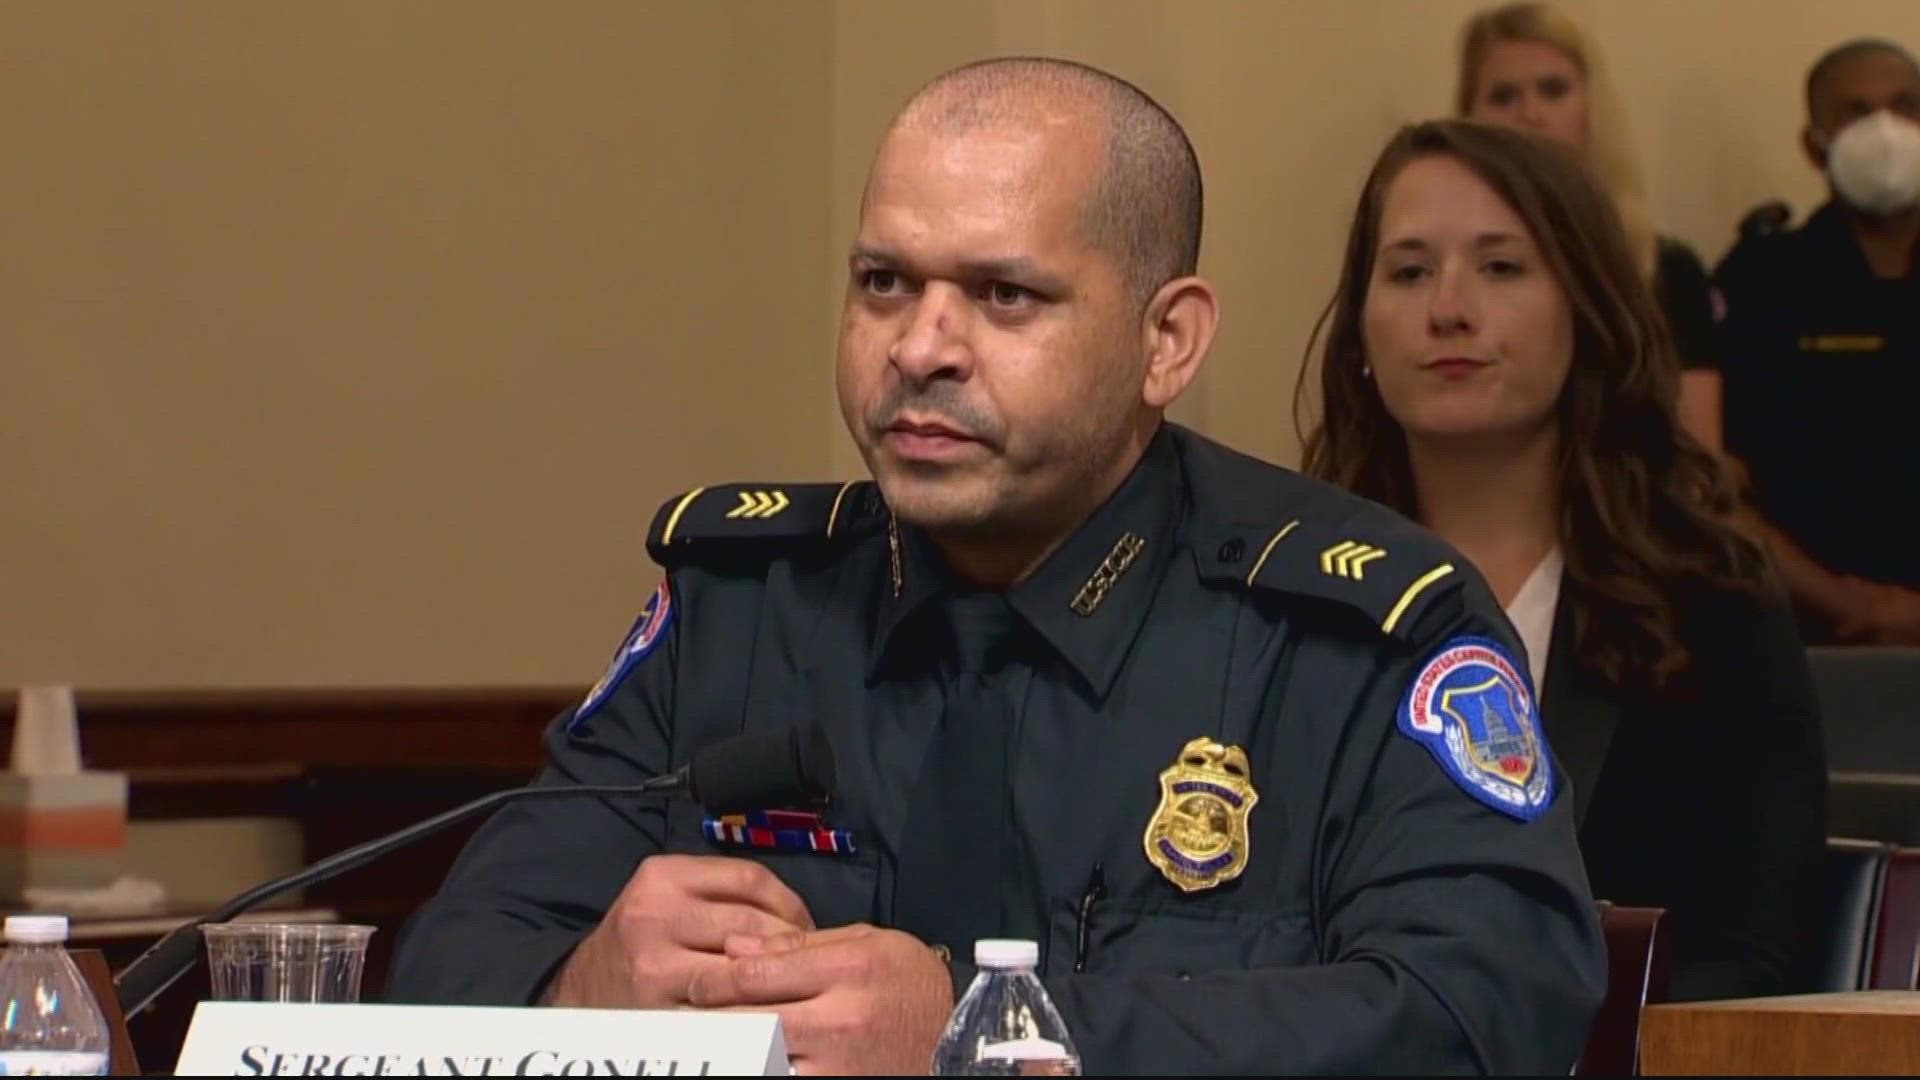 Sergeant Gonell was present when the Jan. 6 attack happened at the U.S. Capitol.